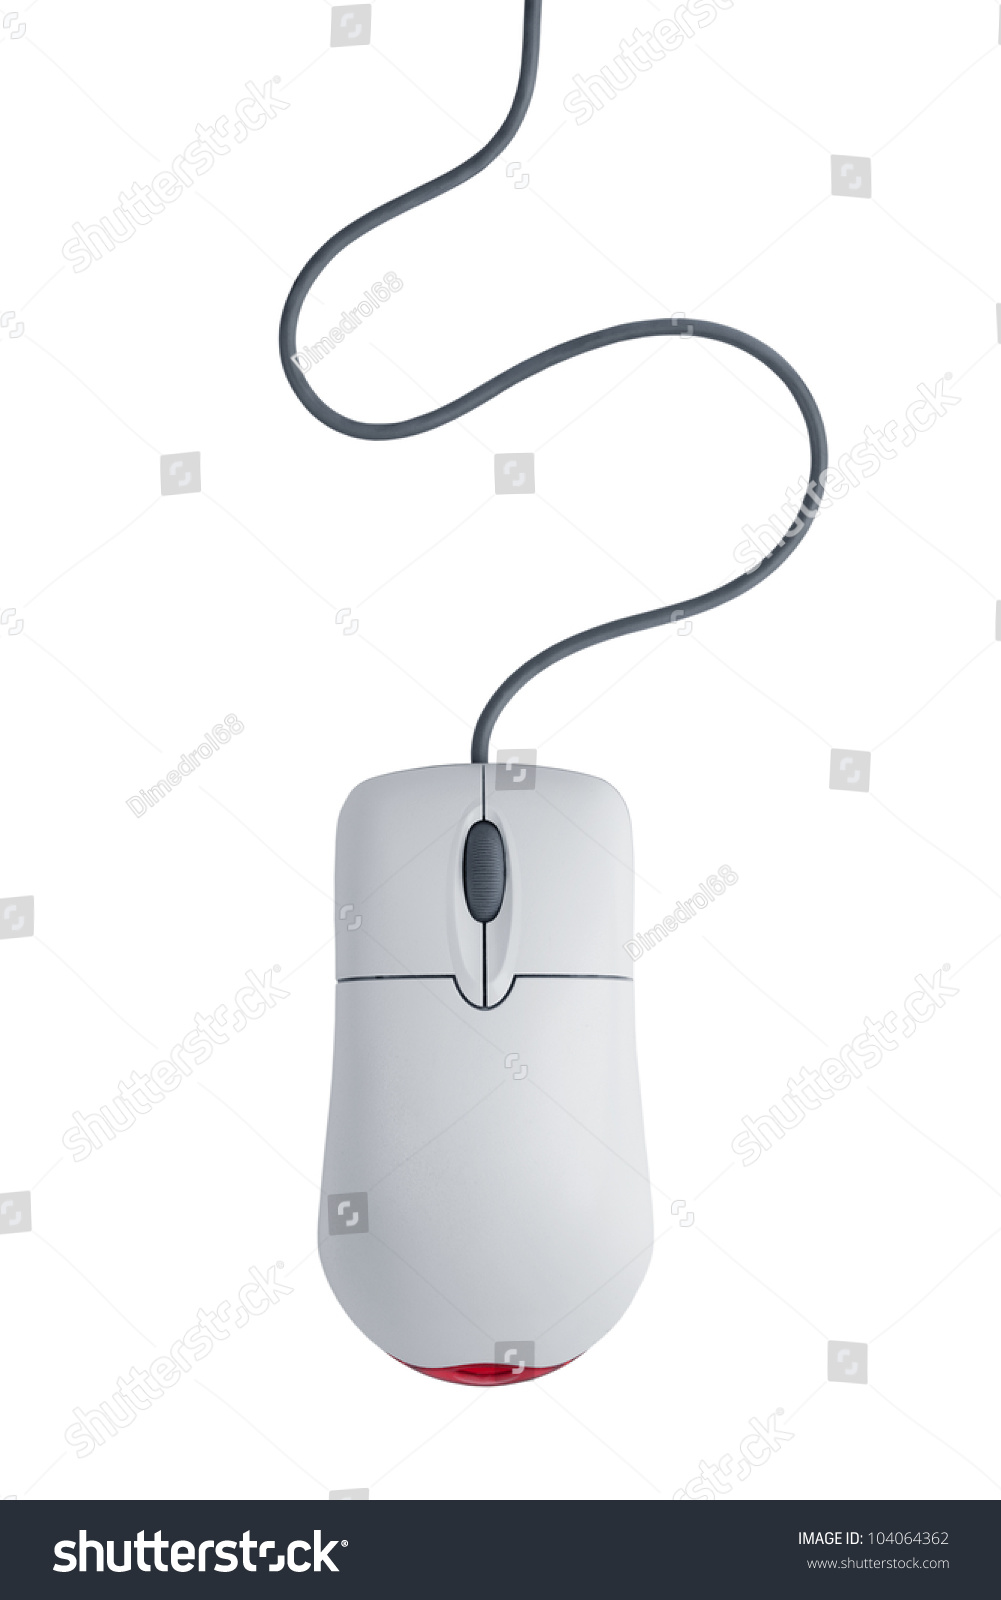 Computer mouse with cord on white background #104064362